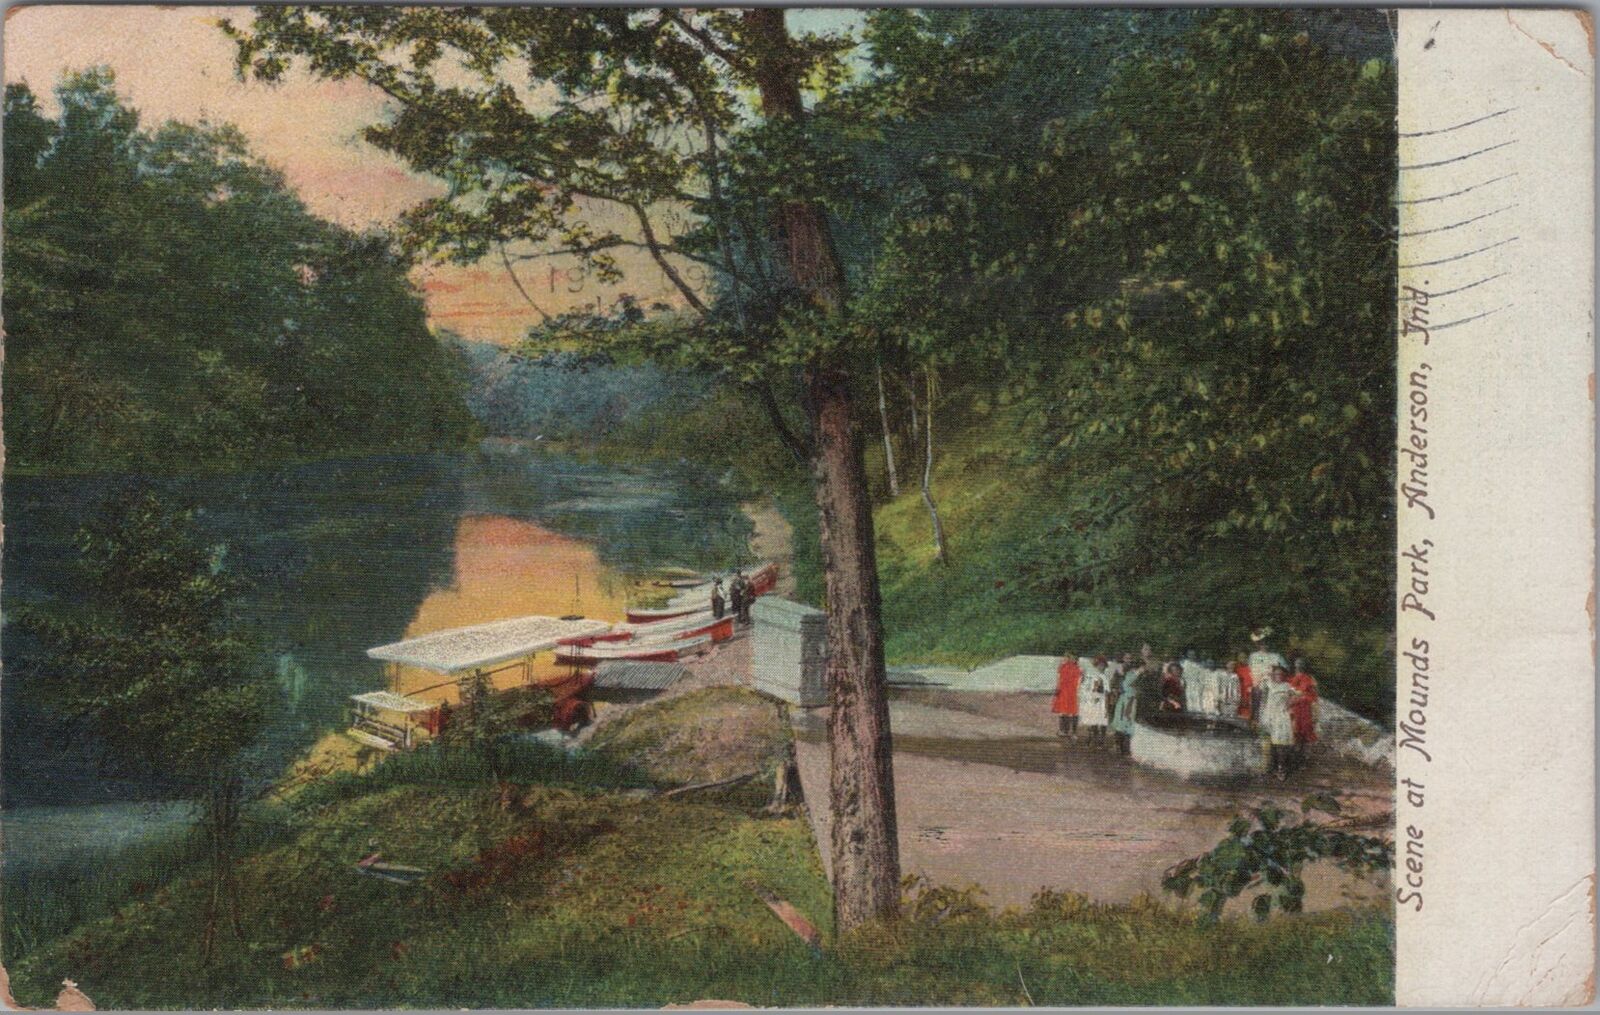 Scene at Mounds Park Anderson IN, Laconia NH 1909 PM Postcard